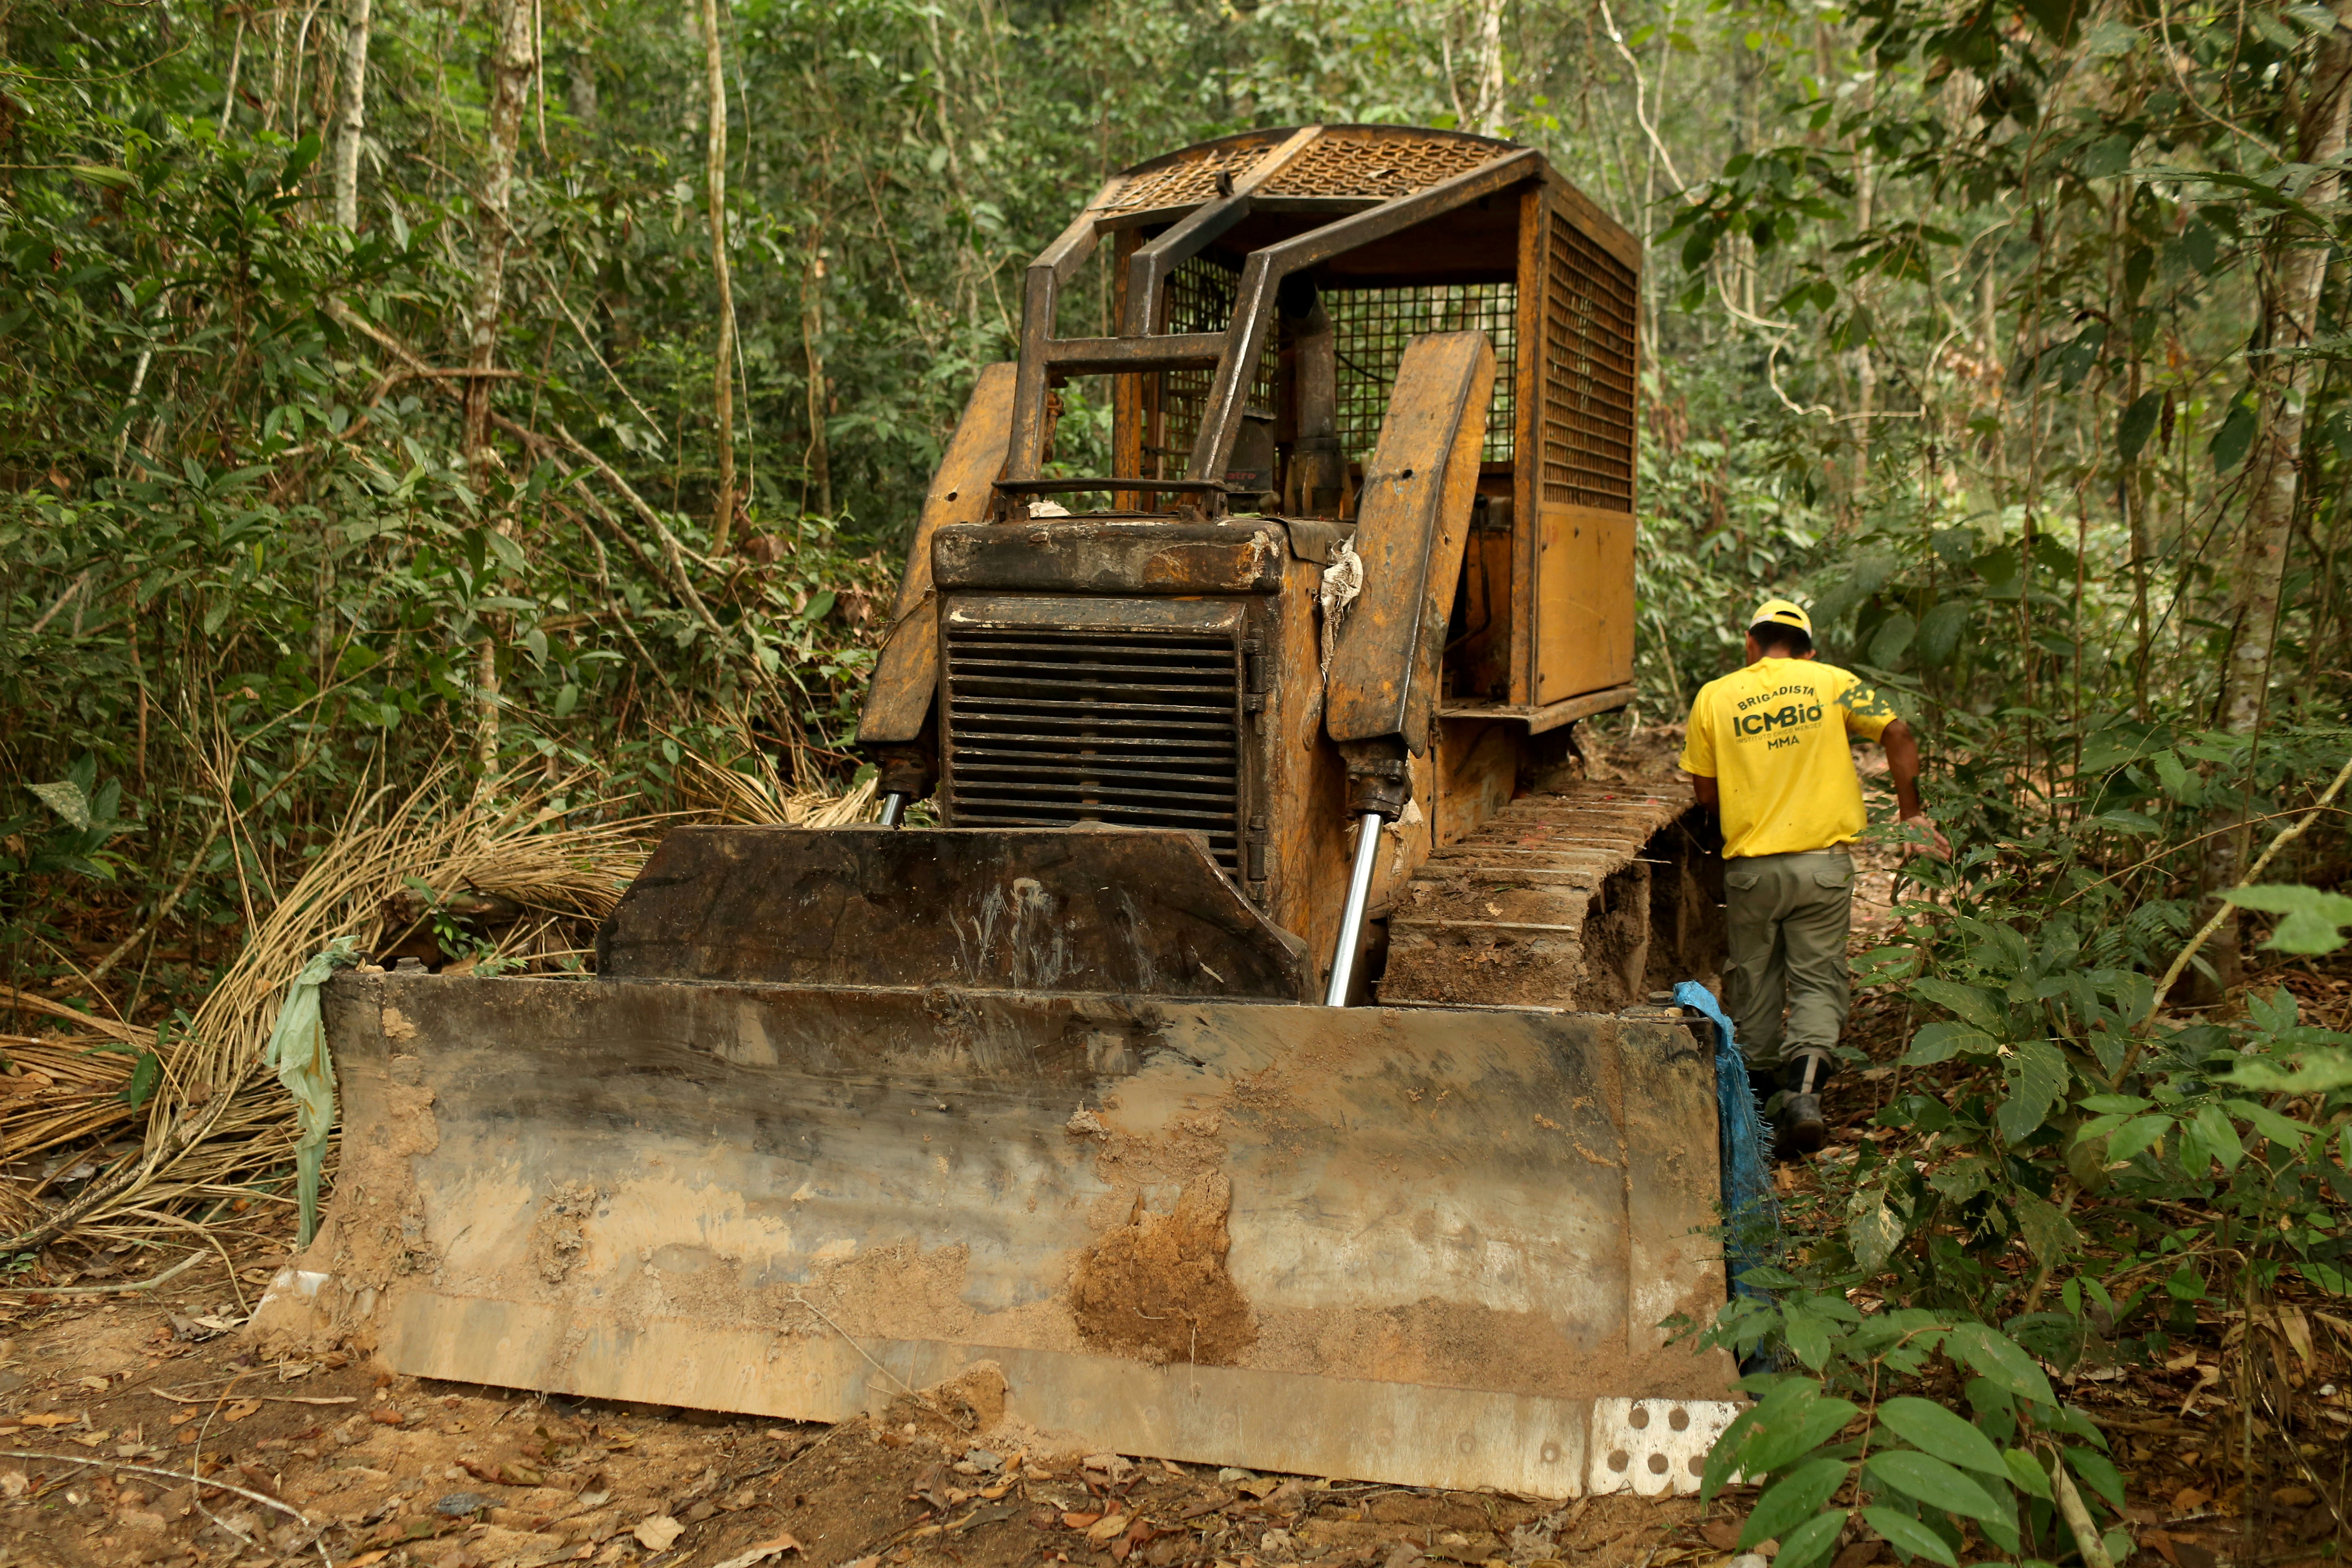 A member of the Chico Mendes Institute for Biodiversity Conservation (ICMBio) walks next a tractor used for deforestation at the National Forest Bom Futuro in Rio Pardo